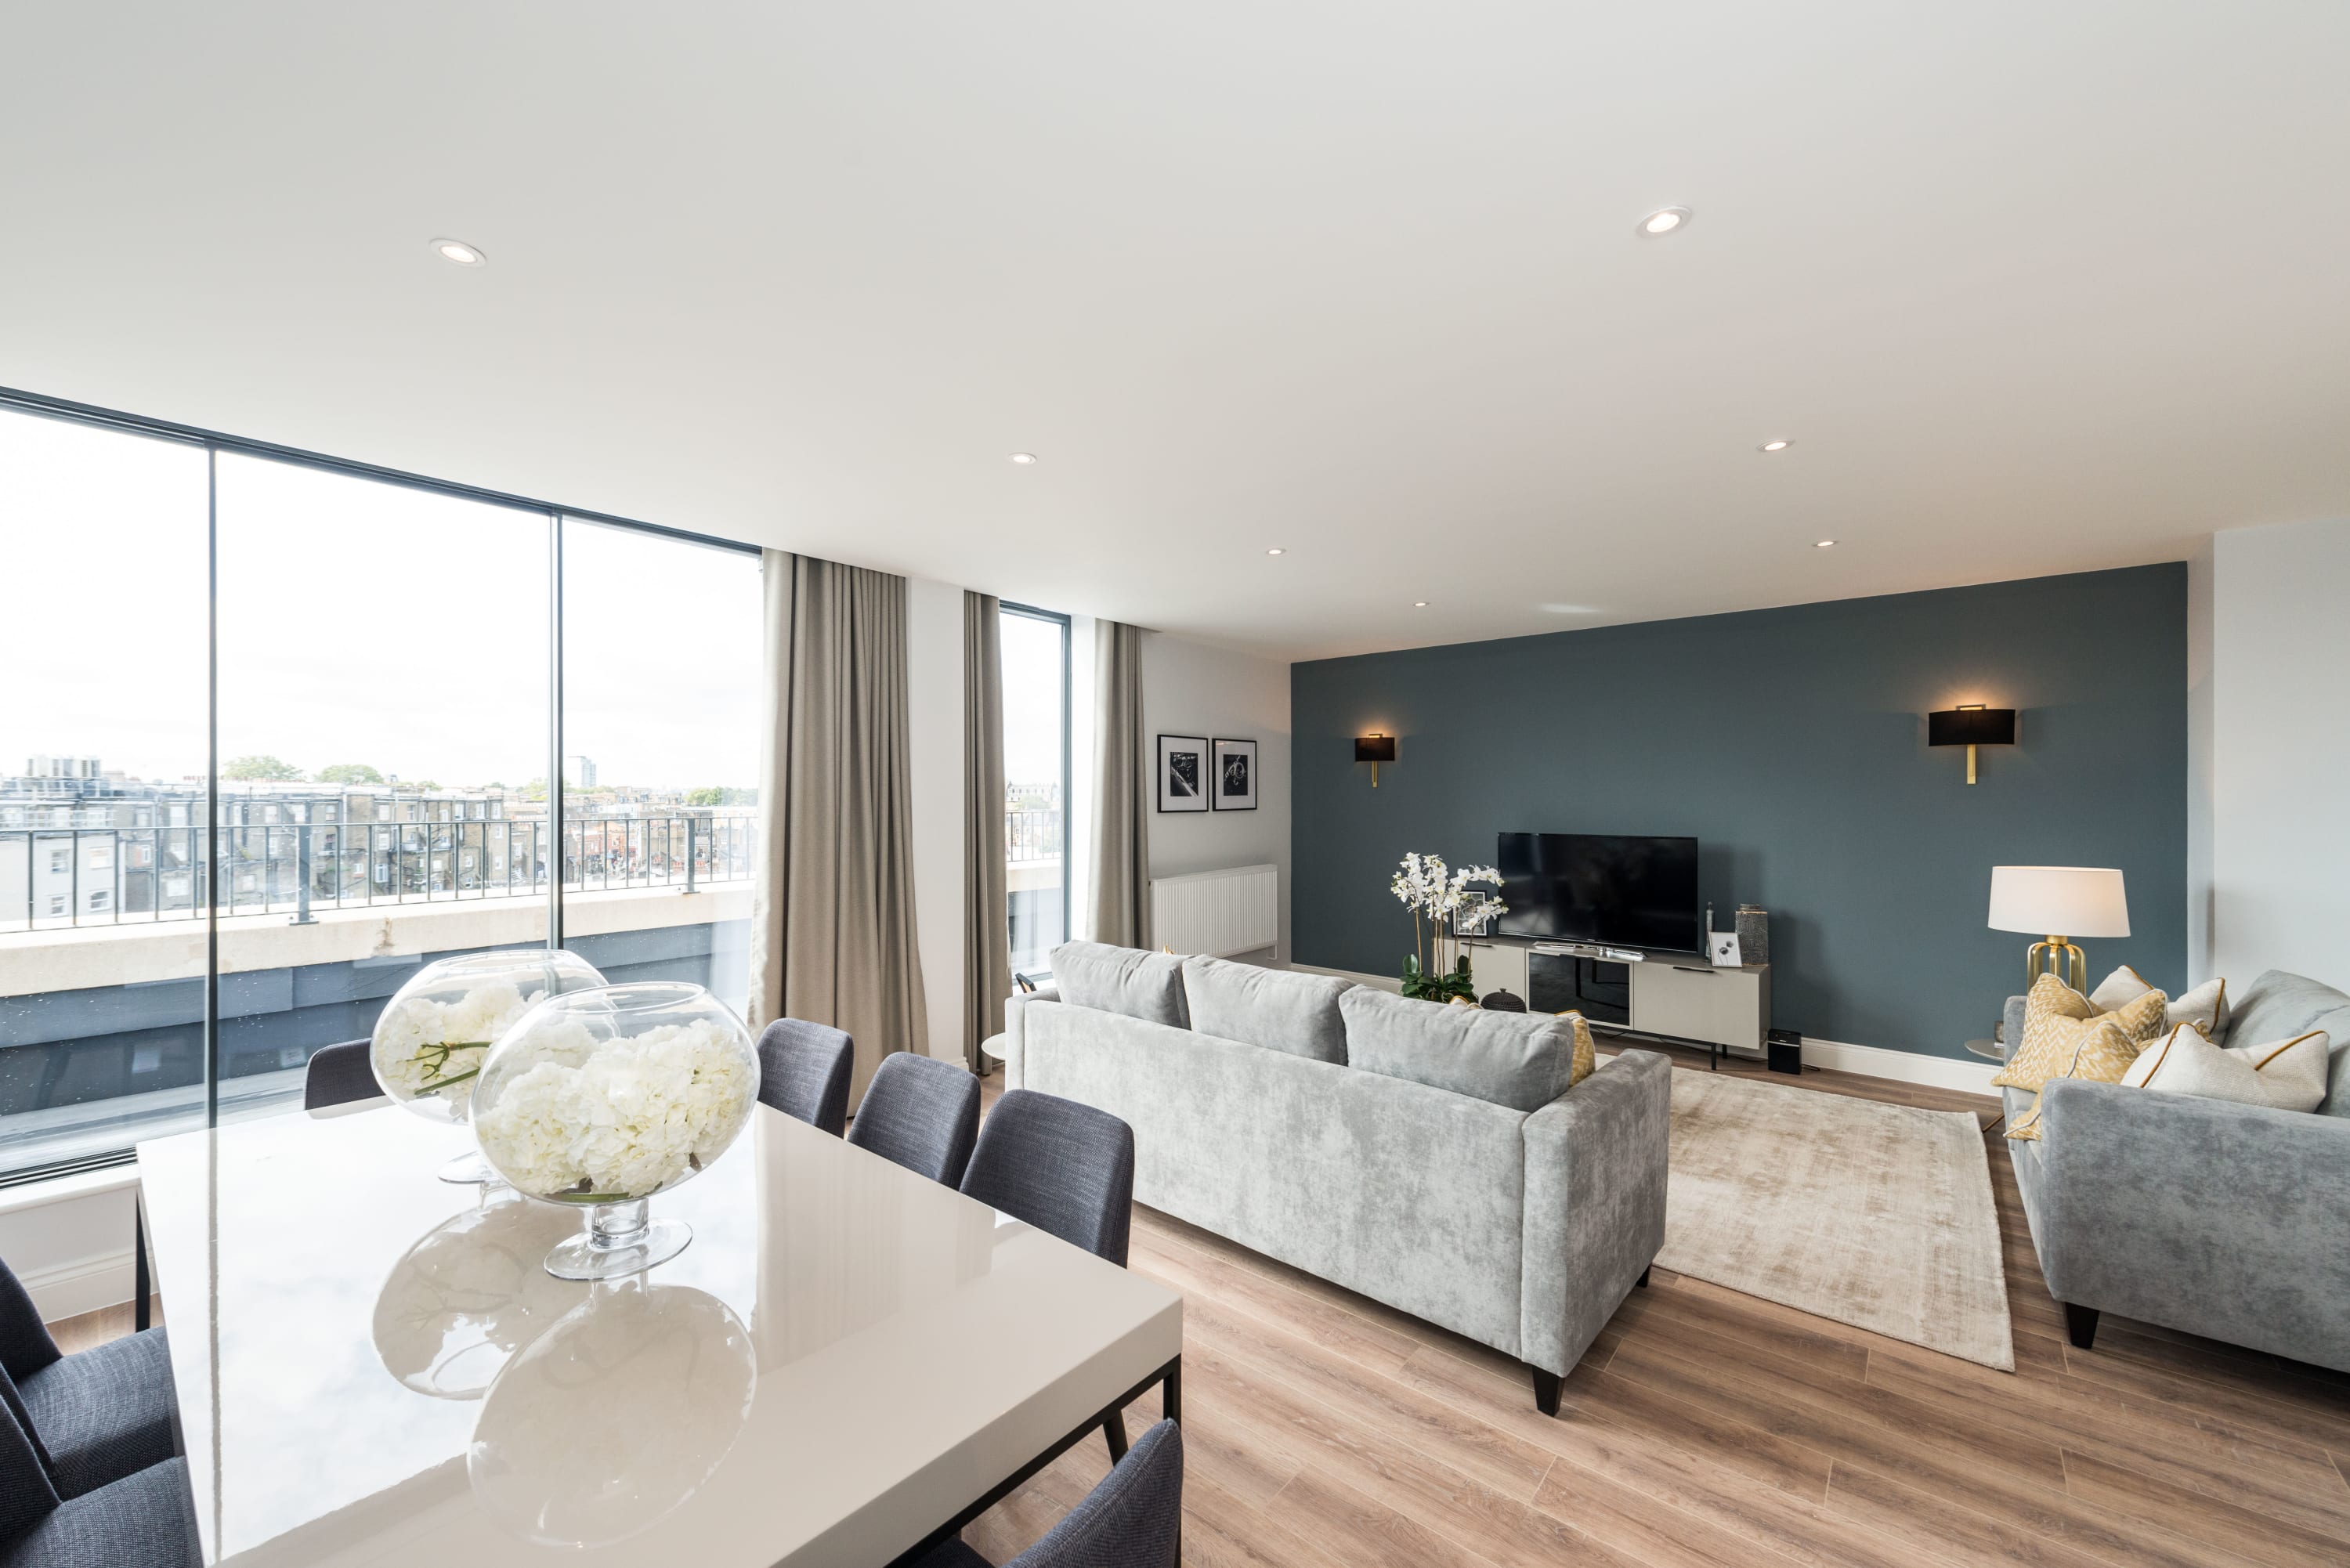 Property Image 1 - Stunning 4 Bedroom Duplex Apartment in Earls Court with Terrace